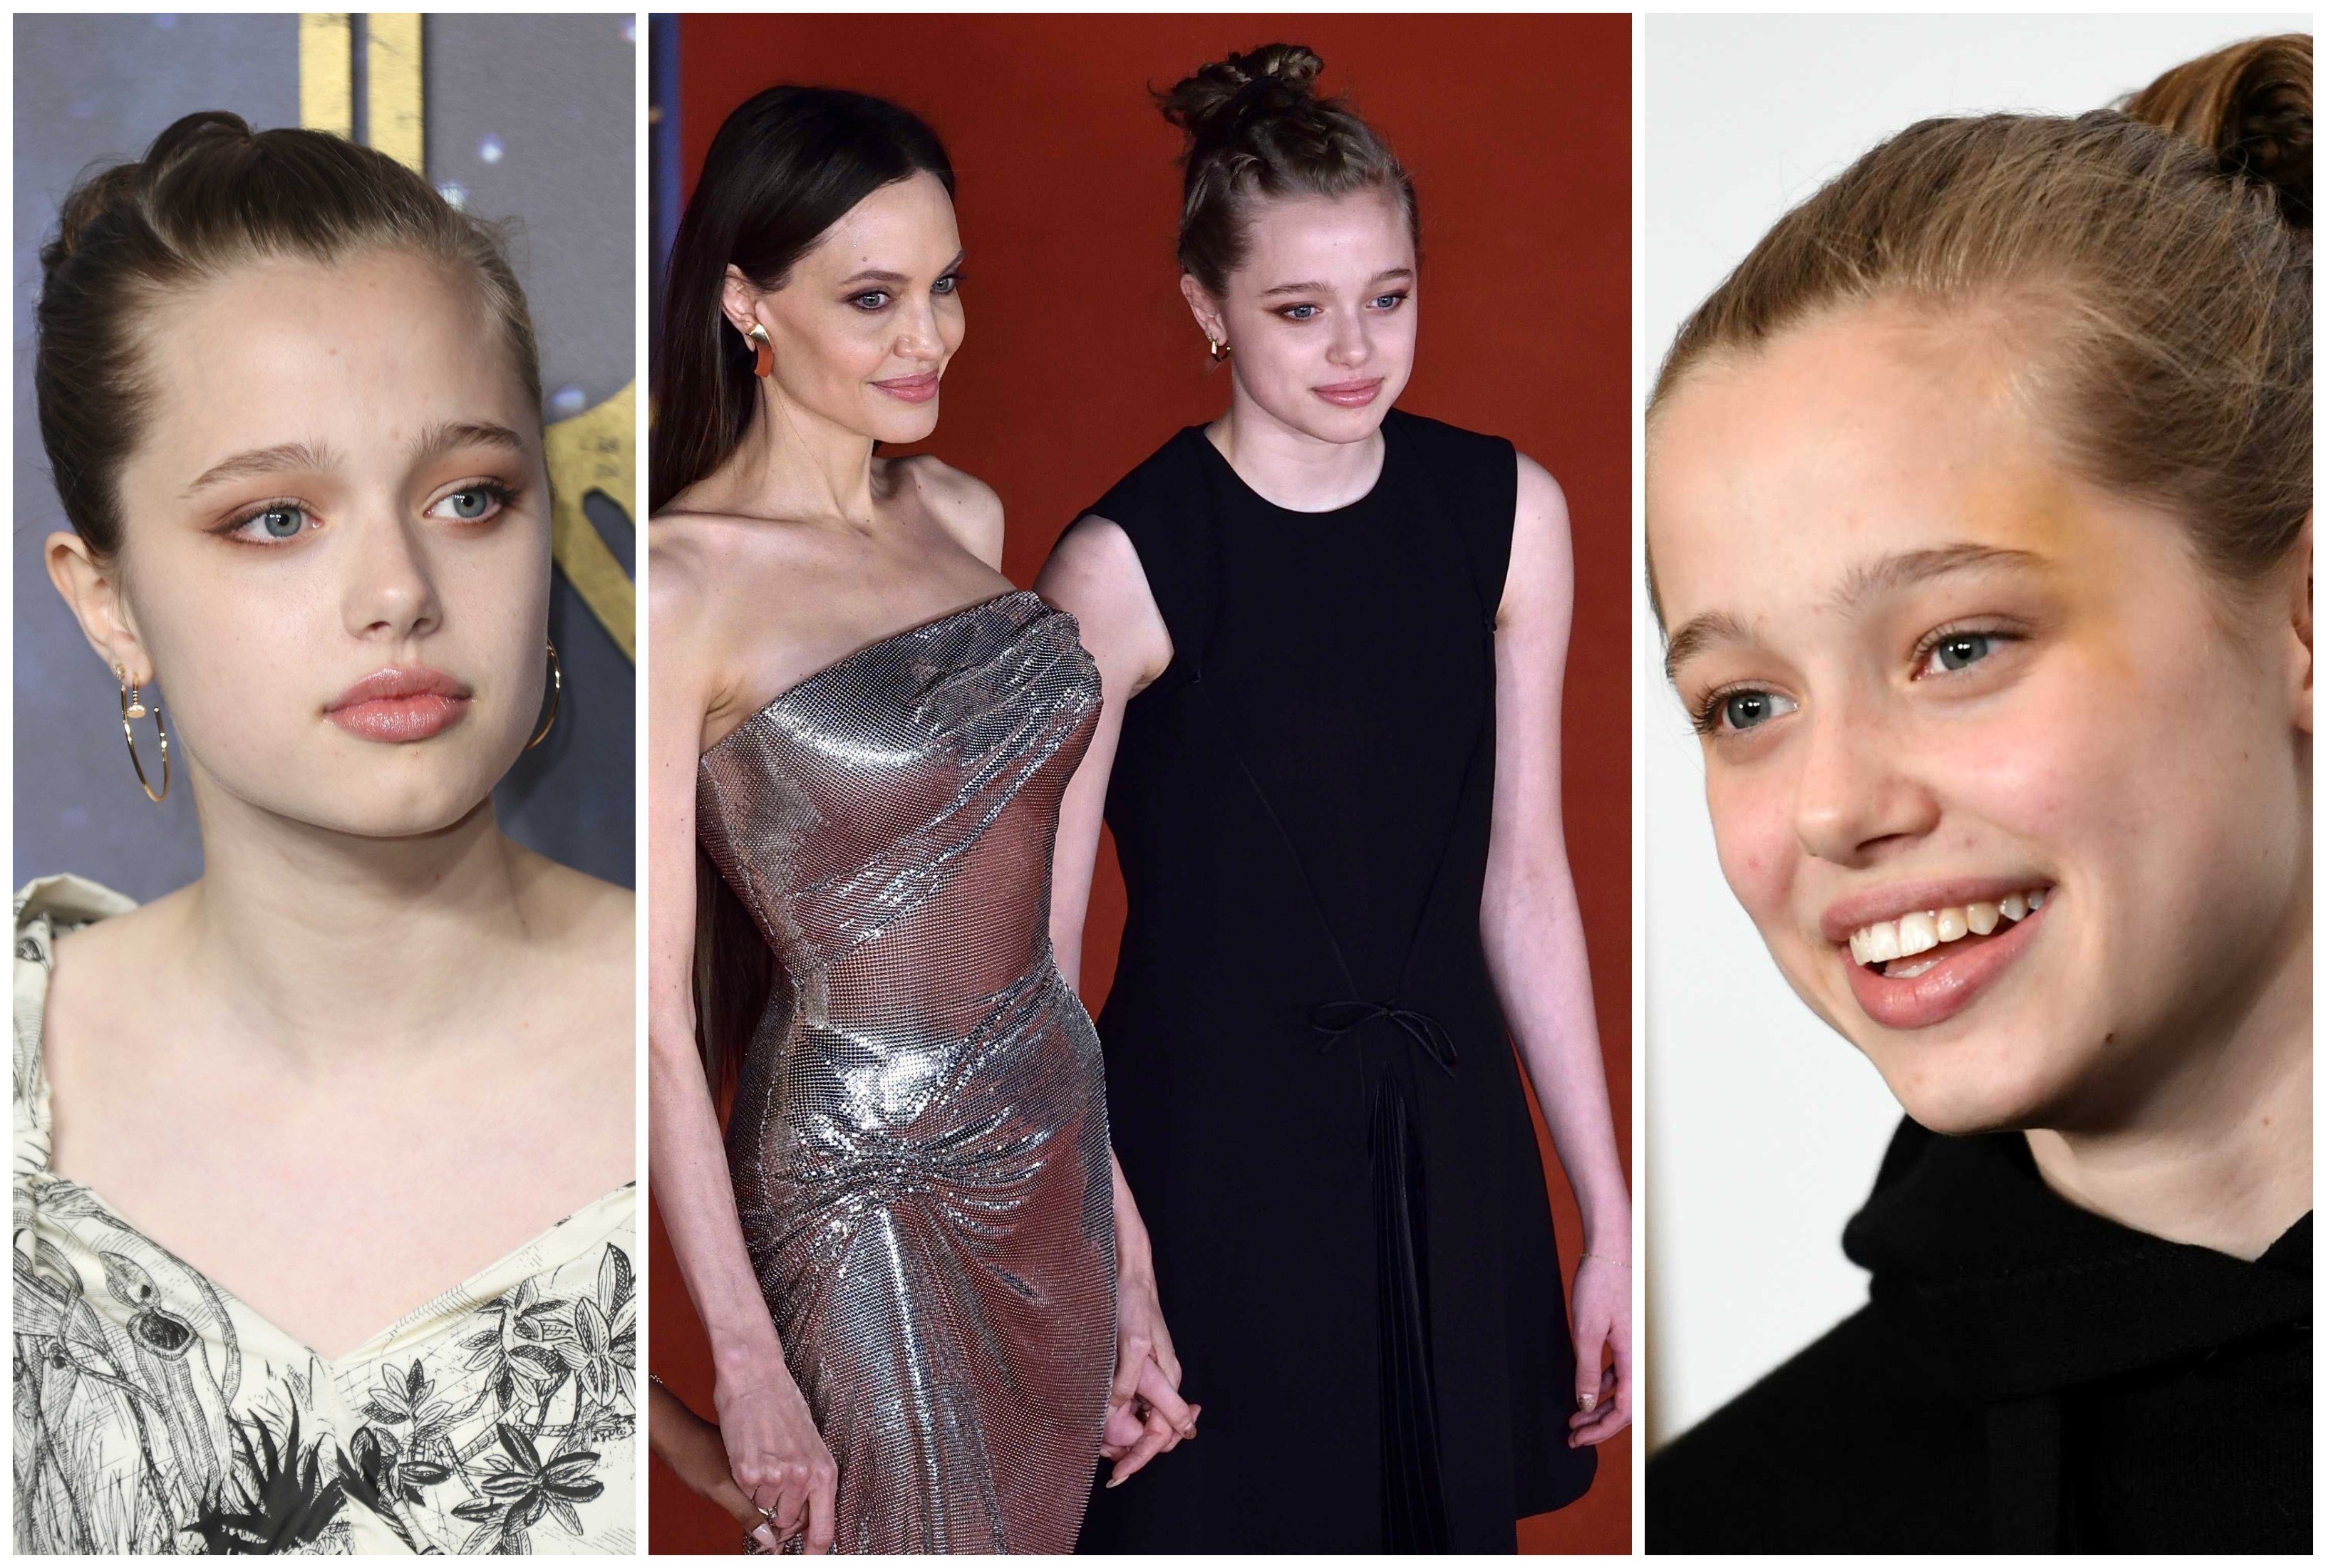 Shiloh Jolie-Pitt has had an eventful 2021 – accompanying mum Angelina Jolie to Eternals premieres was just a start. Photos: Getty Images